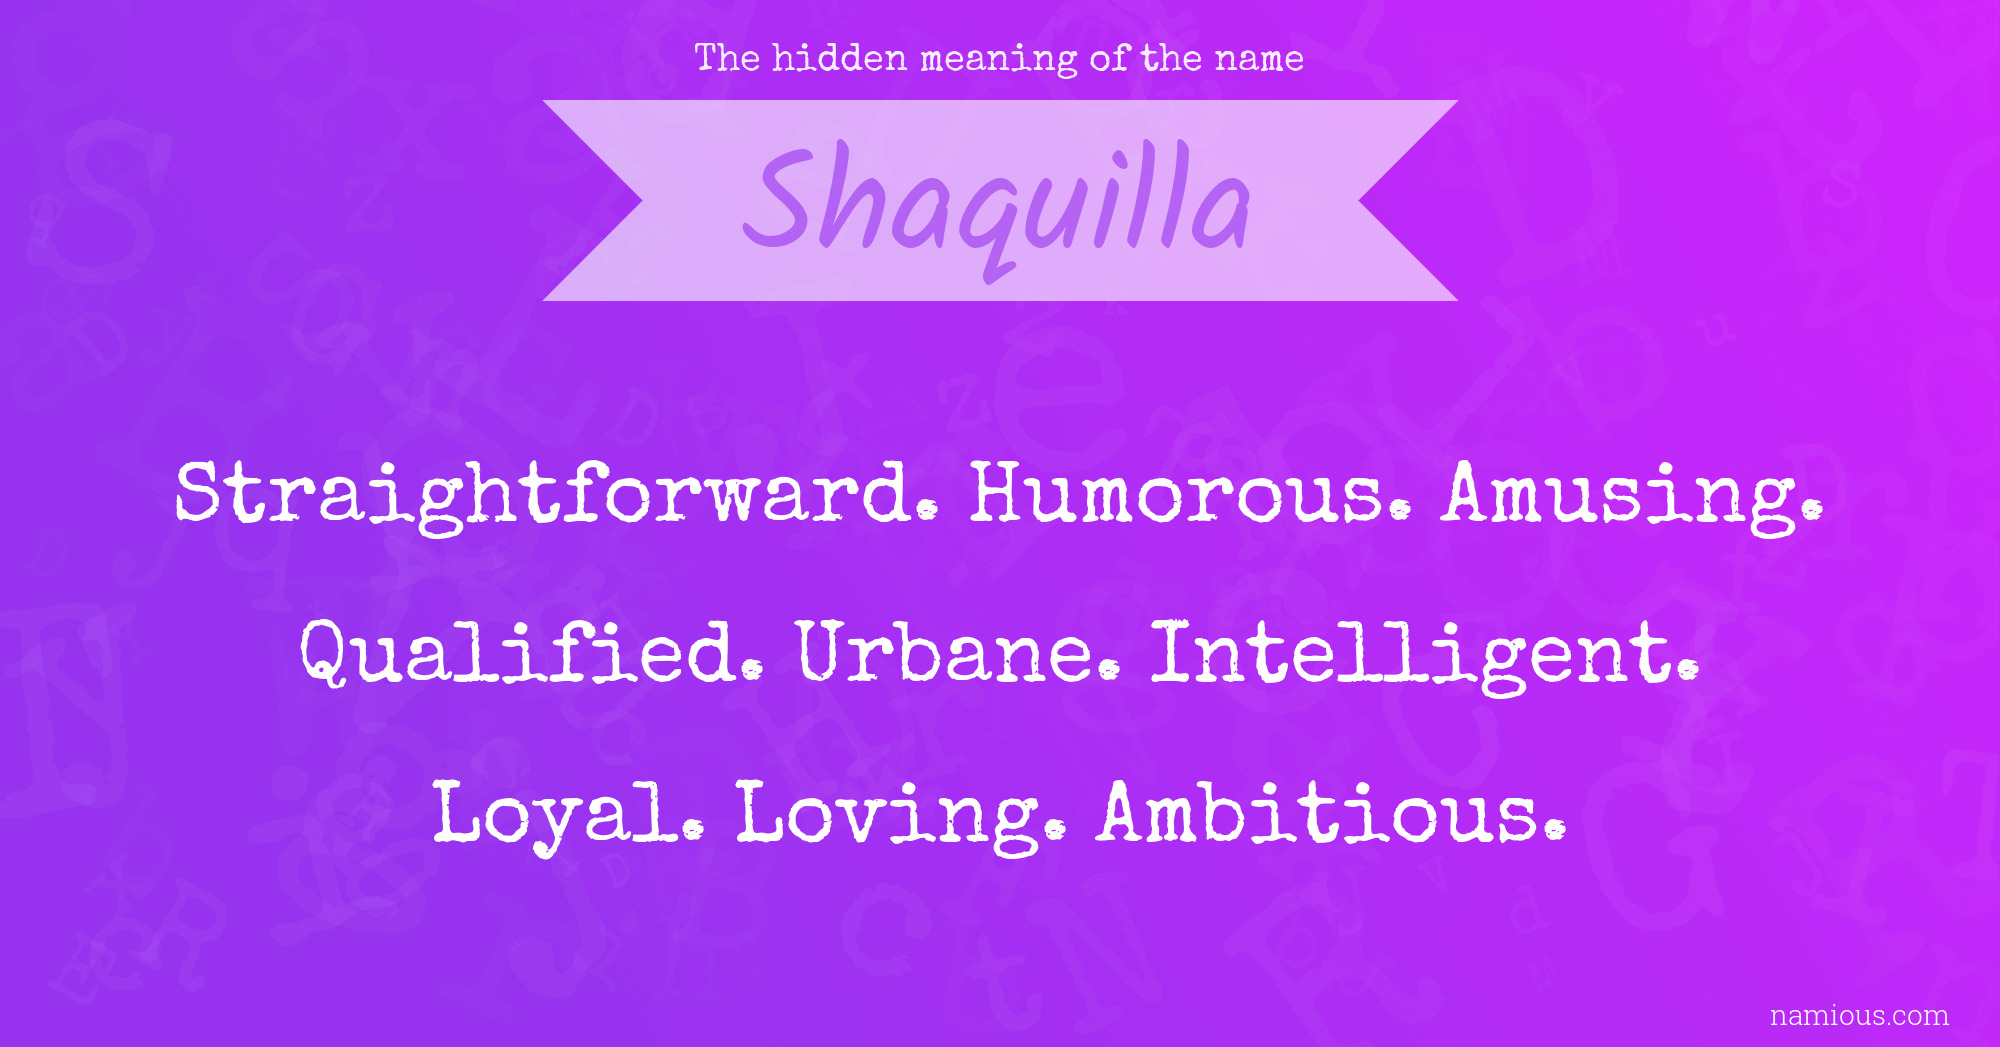 The hidden meaning of the name Shaquilla